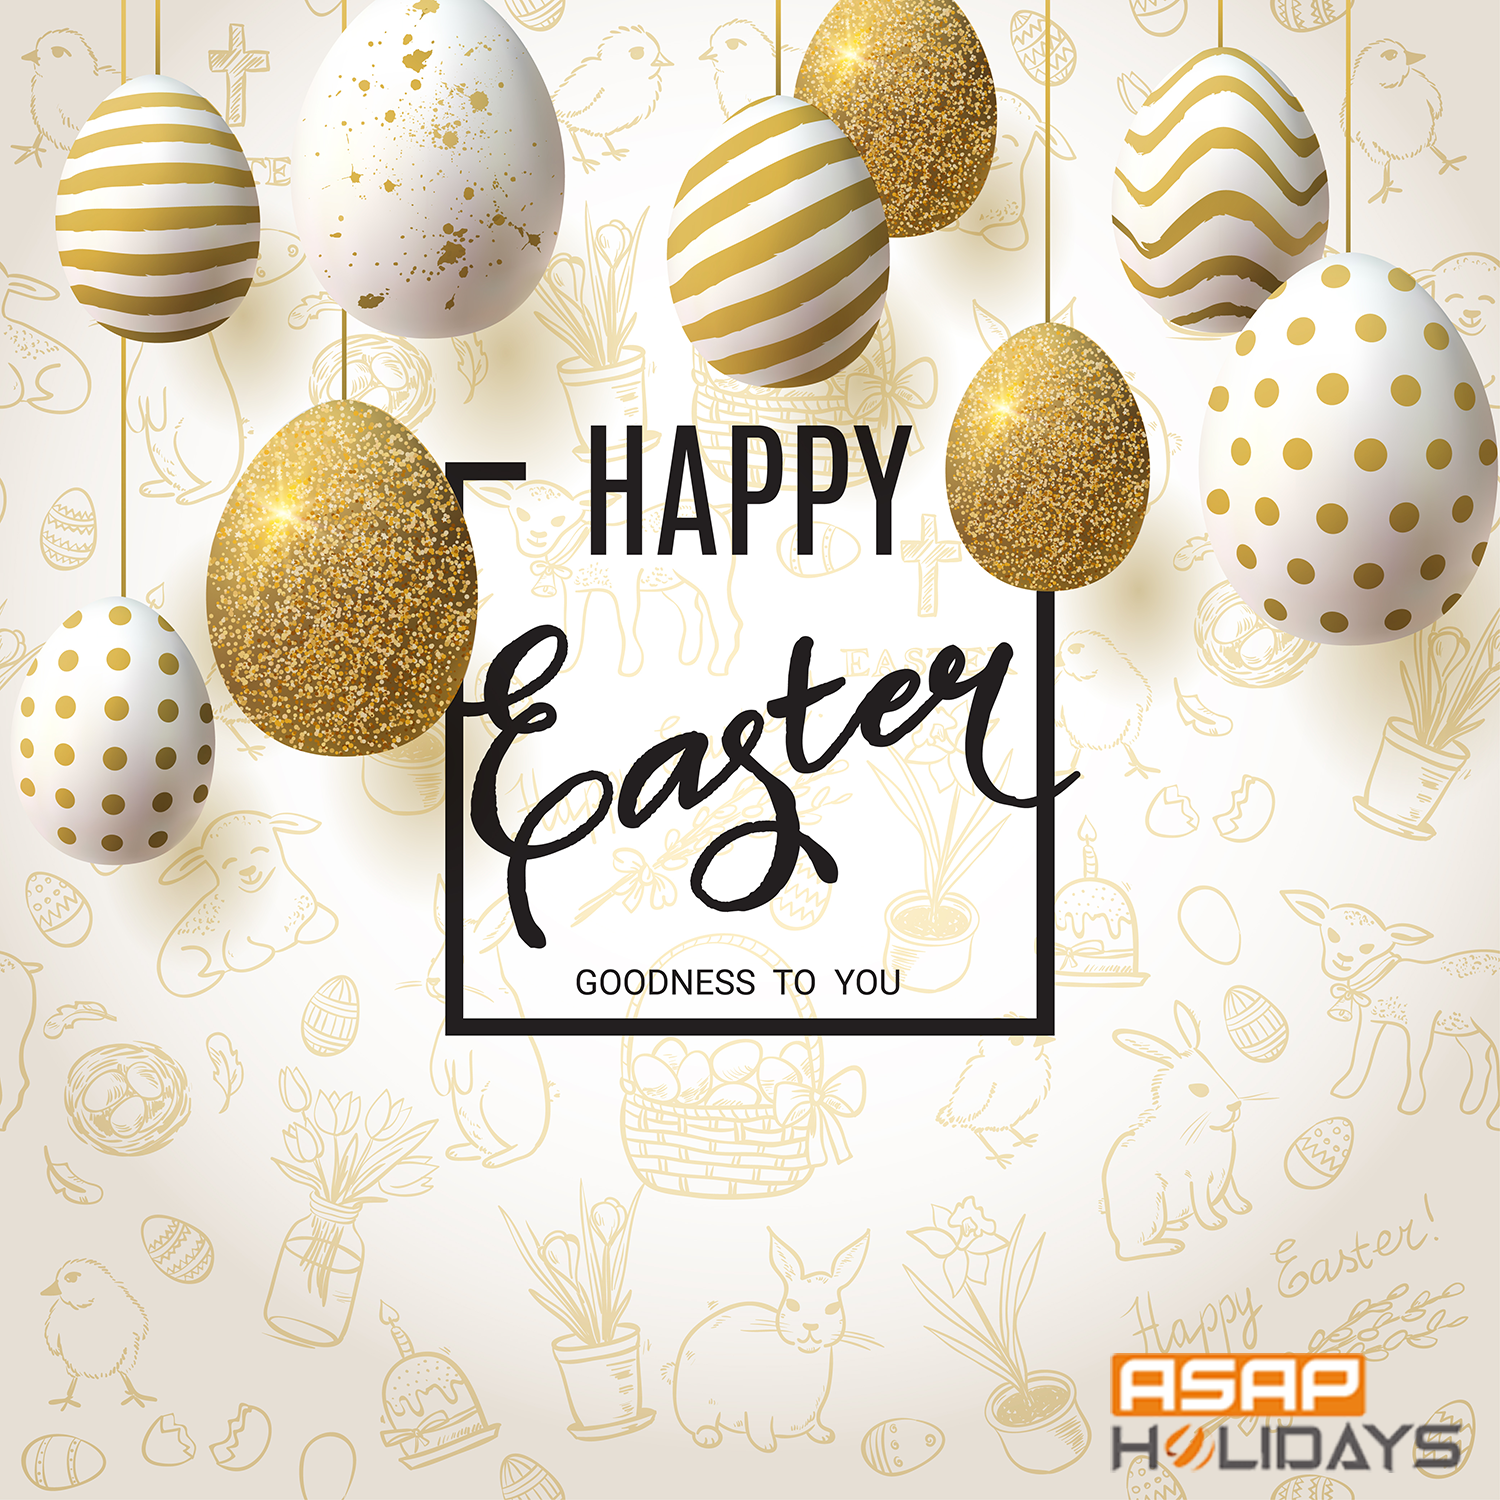 ASAP. Easter image free, Easter background, Happy easter